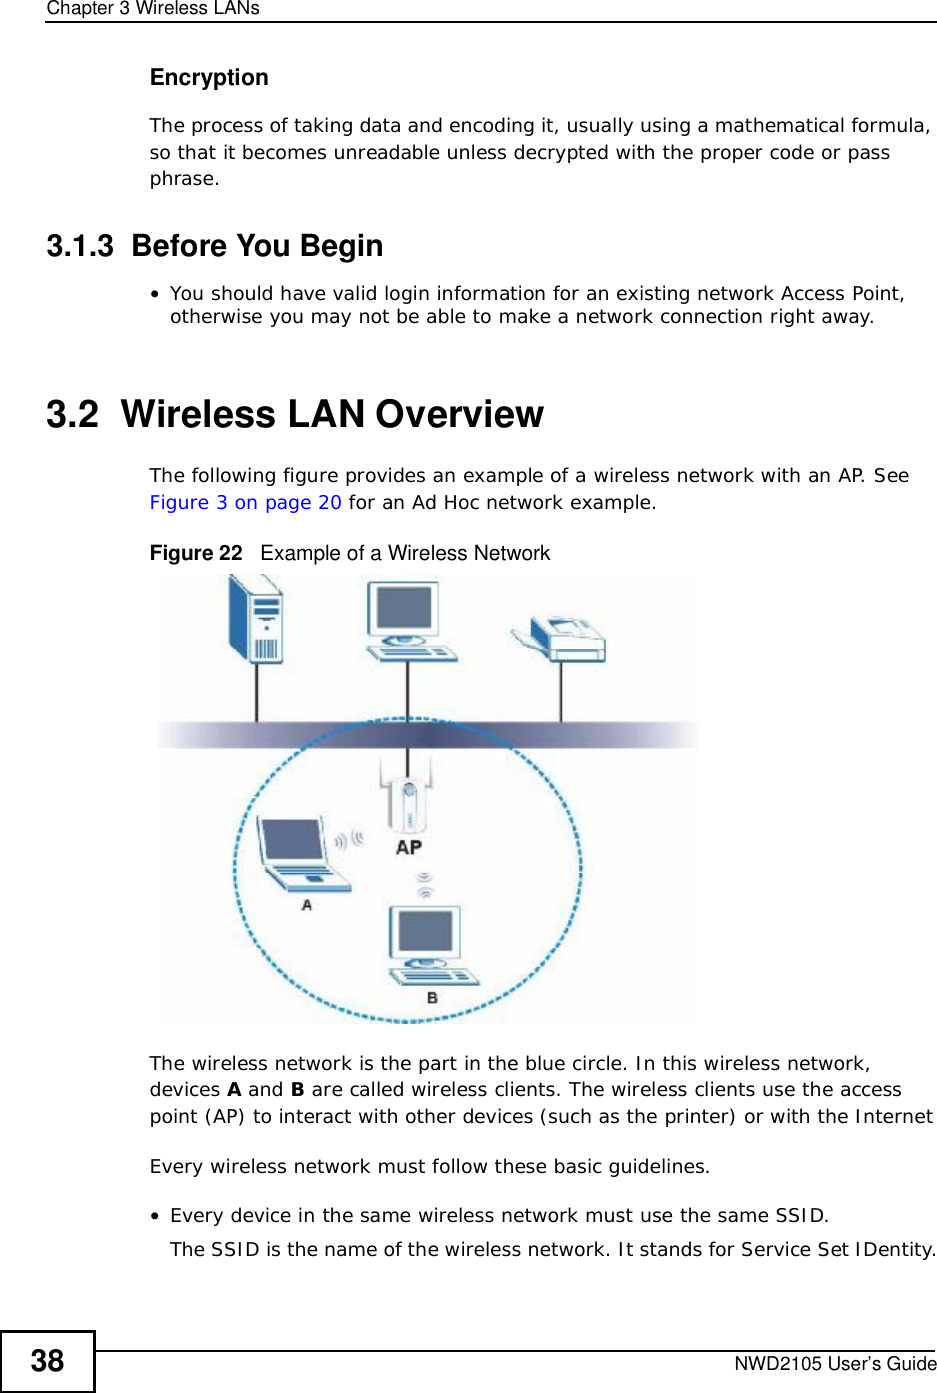 Chapter 3Wireless LANsNWD2105 User’s Guide38EncryptionThe process of taking data and encoding it, usually using a mathematical formula, so that it becomes unreadable unless decrypted with the proper code or pass phrase.3.1.3  Before You Begin•You should have valid login information for an existing network Access Point, otherwise you may not be able to make a network connection right away.3.2  Wireless LAN Overview The following figure provides an example of a wireless network with an AP. SeeFigure 3 on page 20 for an Ad Hoc network example.Figure 22   Example of a Wireless NetworkThe wireless network is the part in the blue circle. In this wireless network, devices A and B are called wireless clients. The wireless clients use the access point (AP) to interact with other devices (such as the printer) or with the InternetEvery wireless network must follow these basic guidelines.•Every device in the same wireless network must use the same SSID.The SSID is the name of the wireless network. It stands for Service Set IDentity.